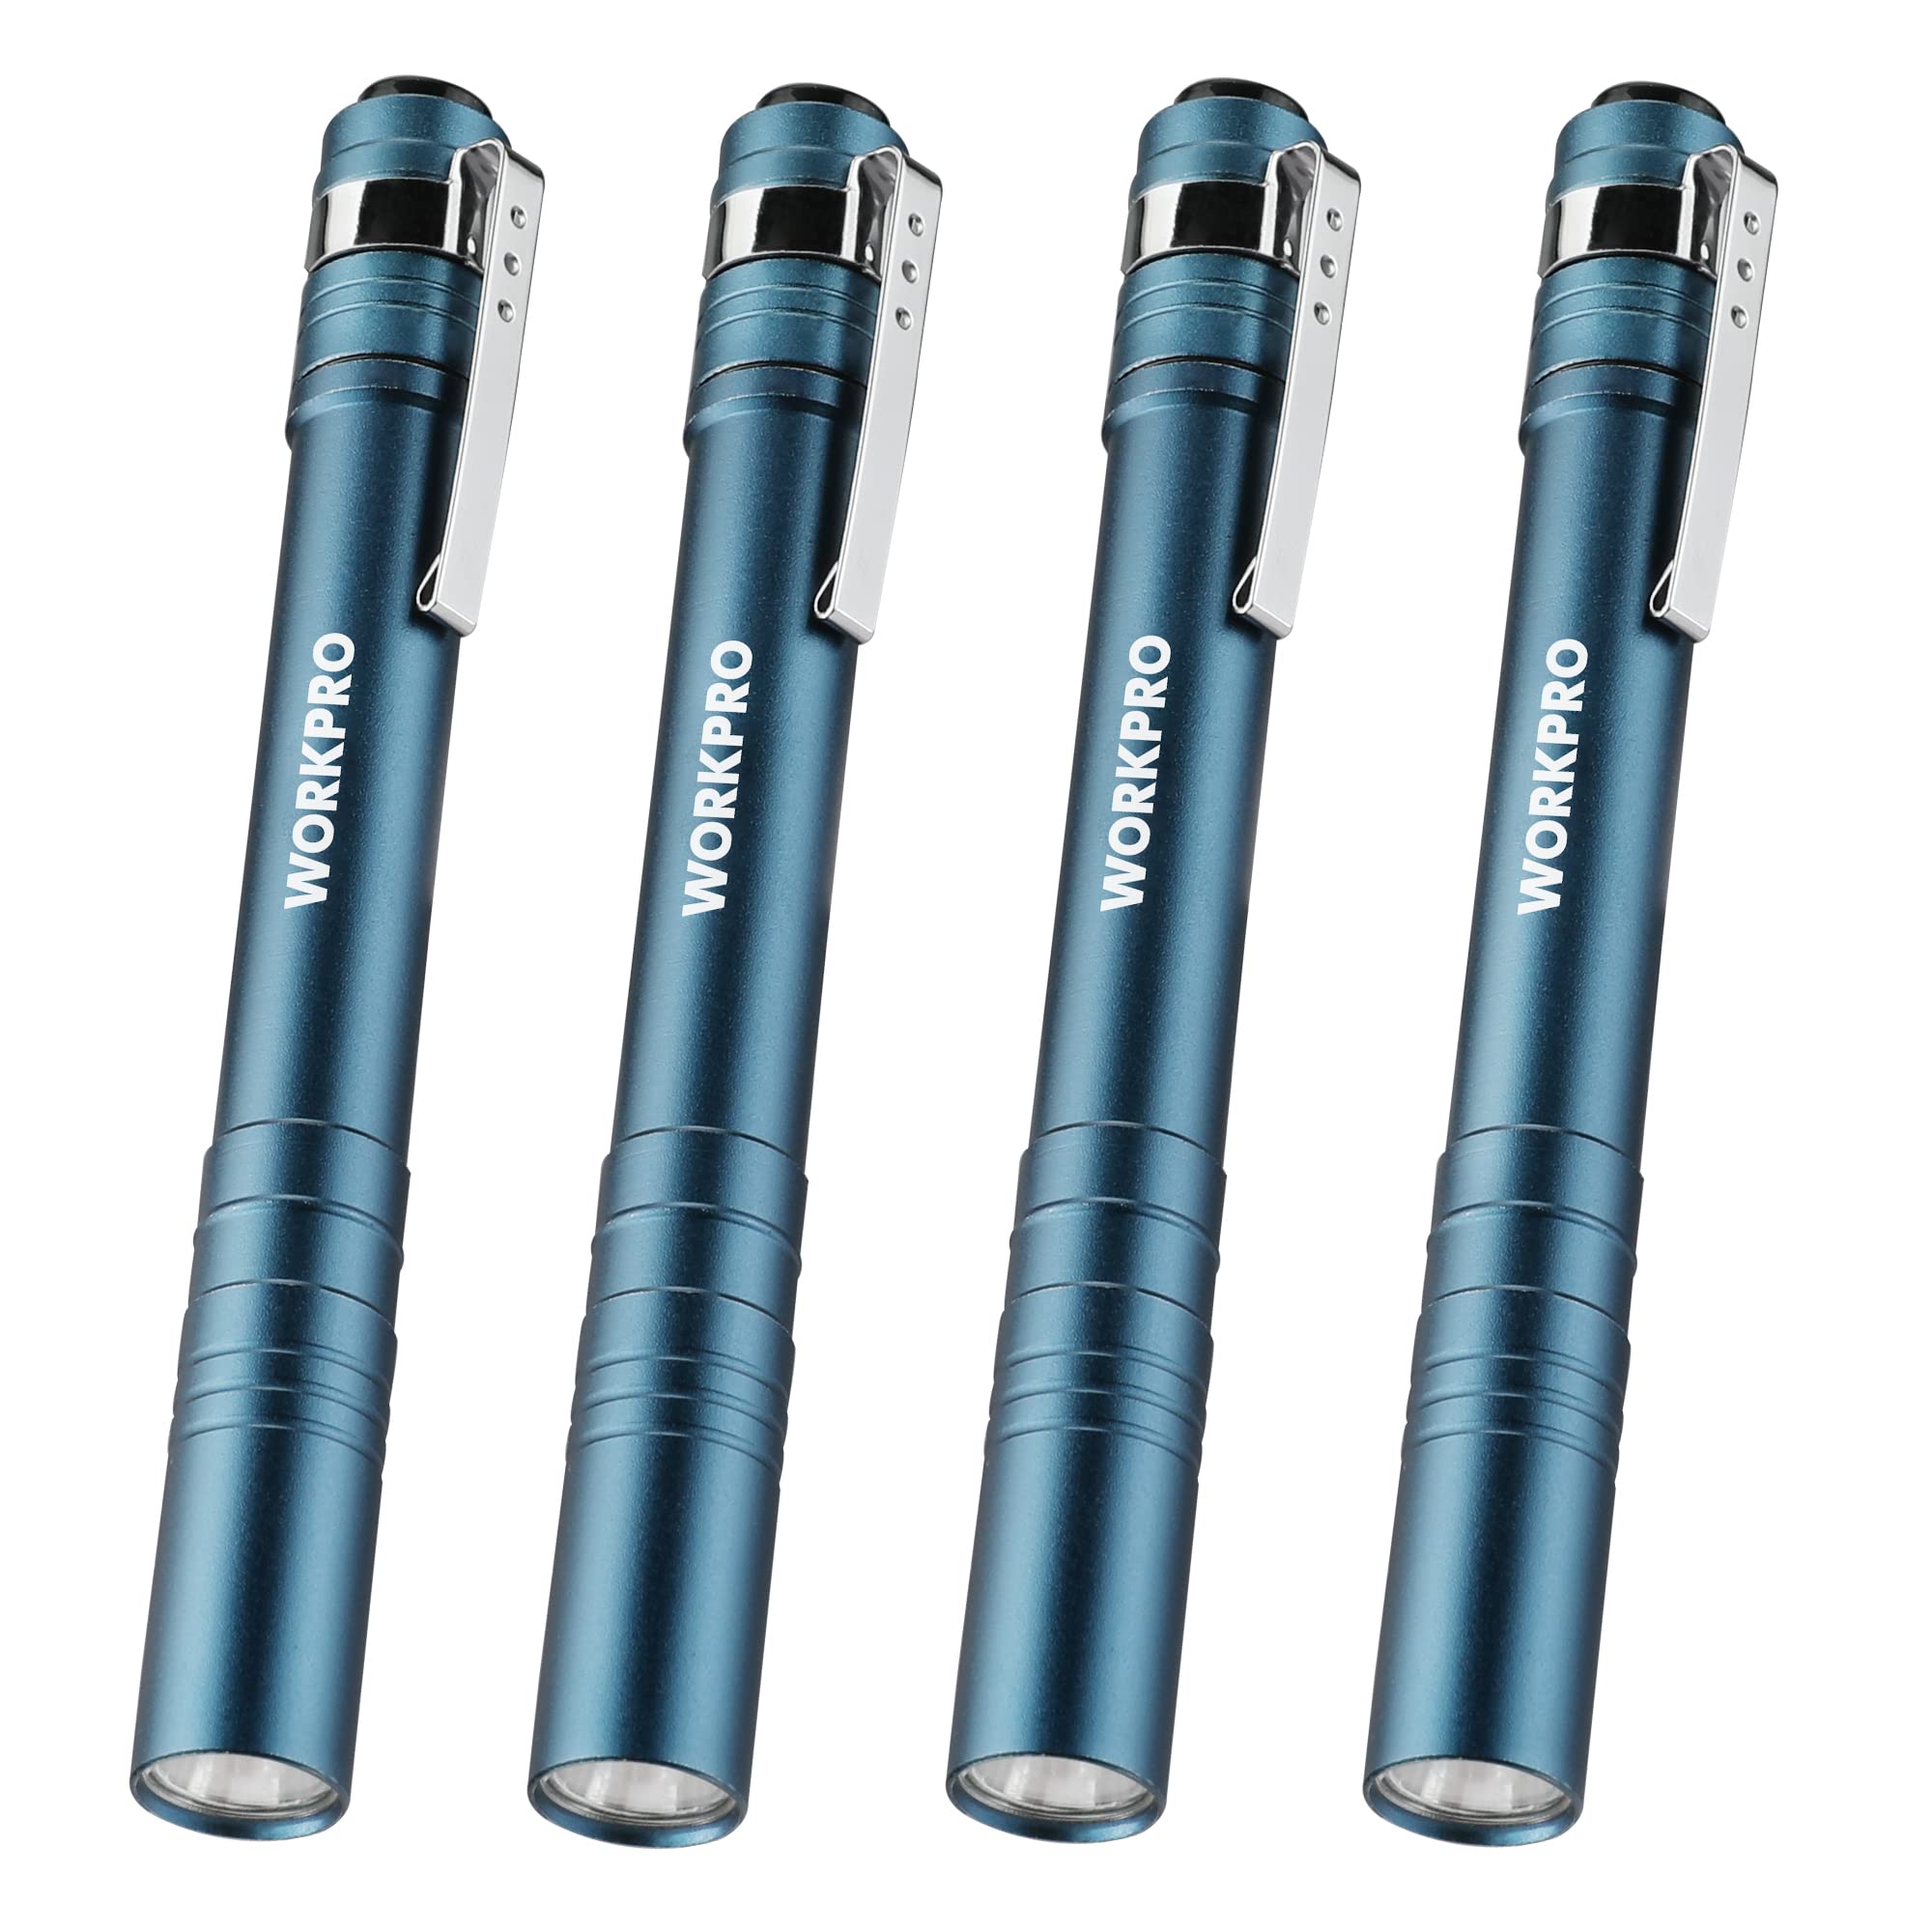 4 pack - LED Pen Light, Aluminum Pen Flashlights, Pocket Flashlight with Clip for Inspection, Emergency, Everyday, 8AAA Batteries Include, Gray(4-Pack)